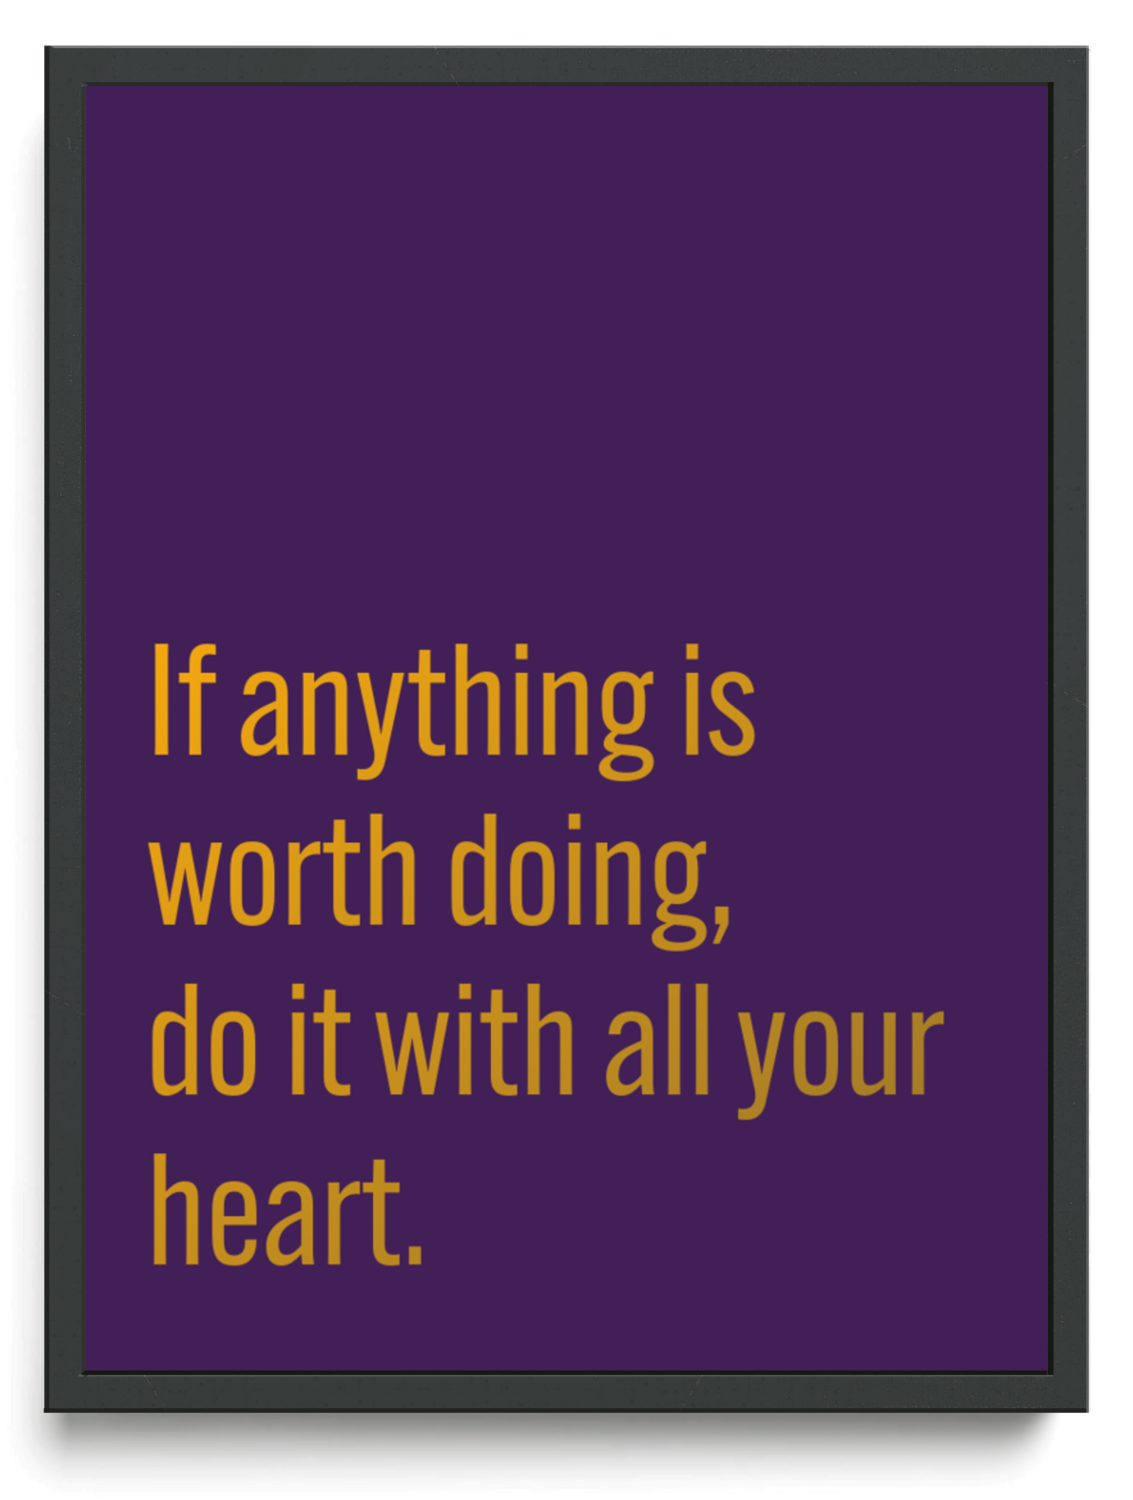 If anything is worth doing, do it with all your heart. framed typographic print